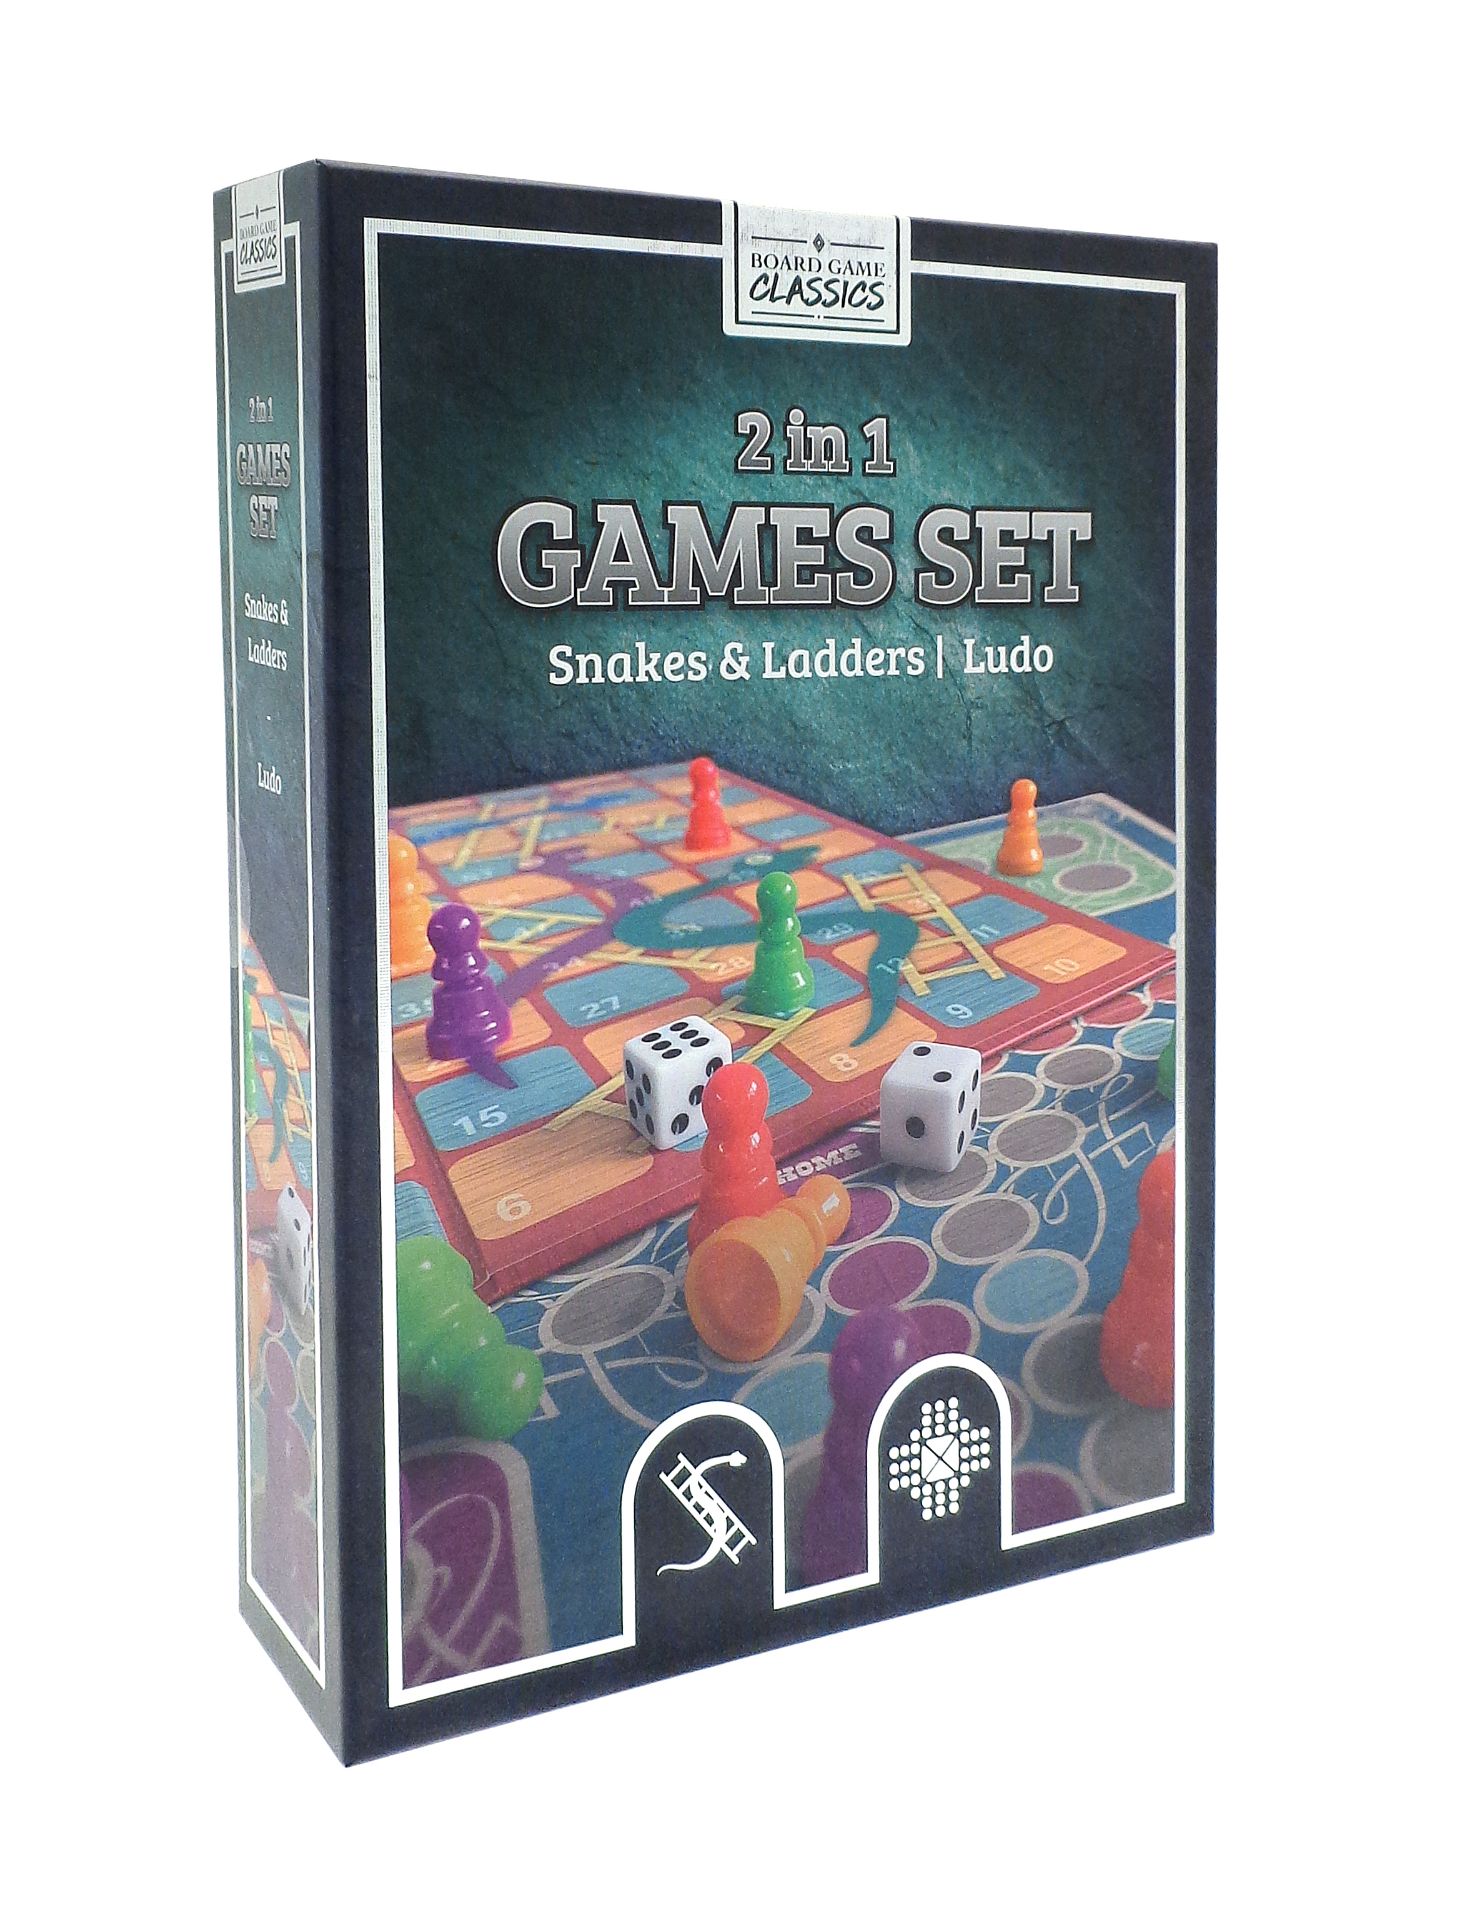 New 2 in 1 Games Set - Snakes & Ladders, Ludo - Image 2 of 3